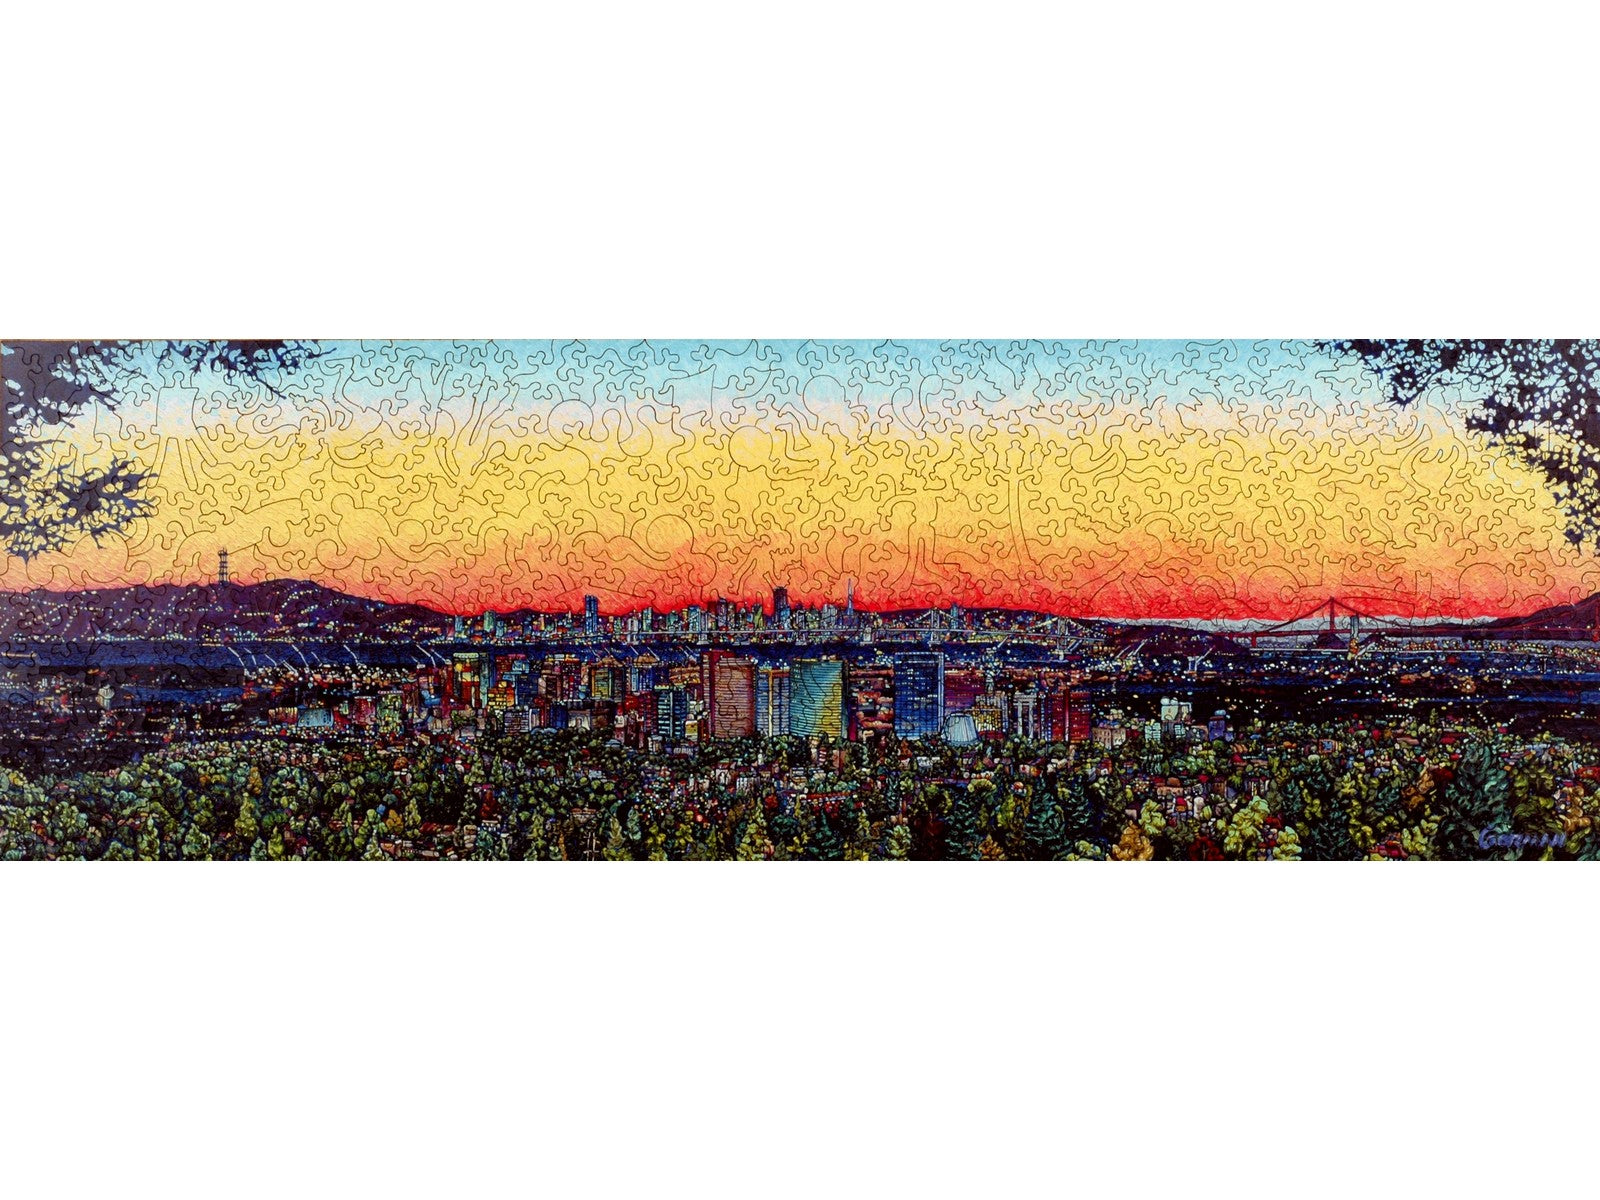 The front of the puzzle, City Sunset, which shows the city skyline of San Francisco at sunset.